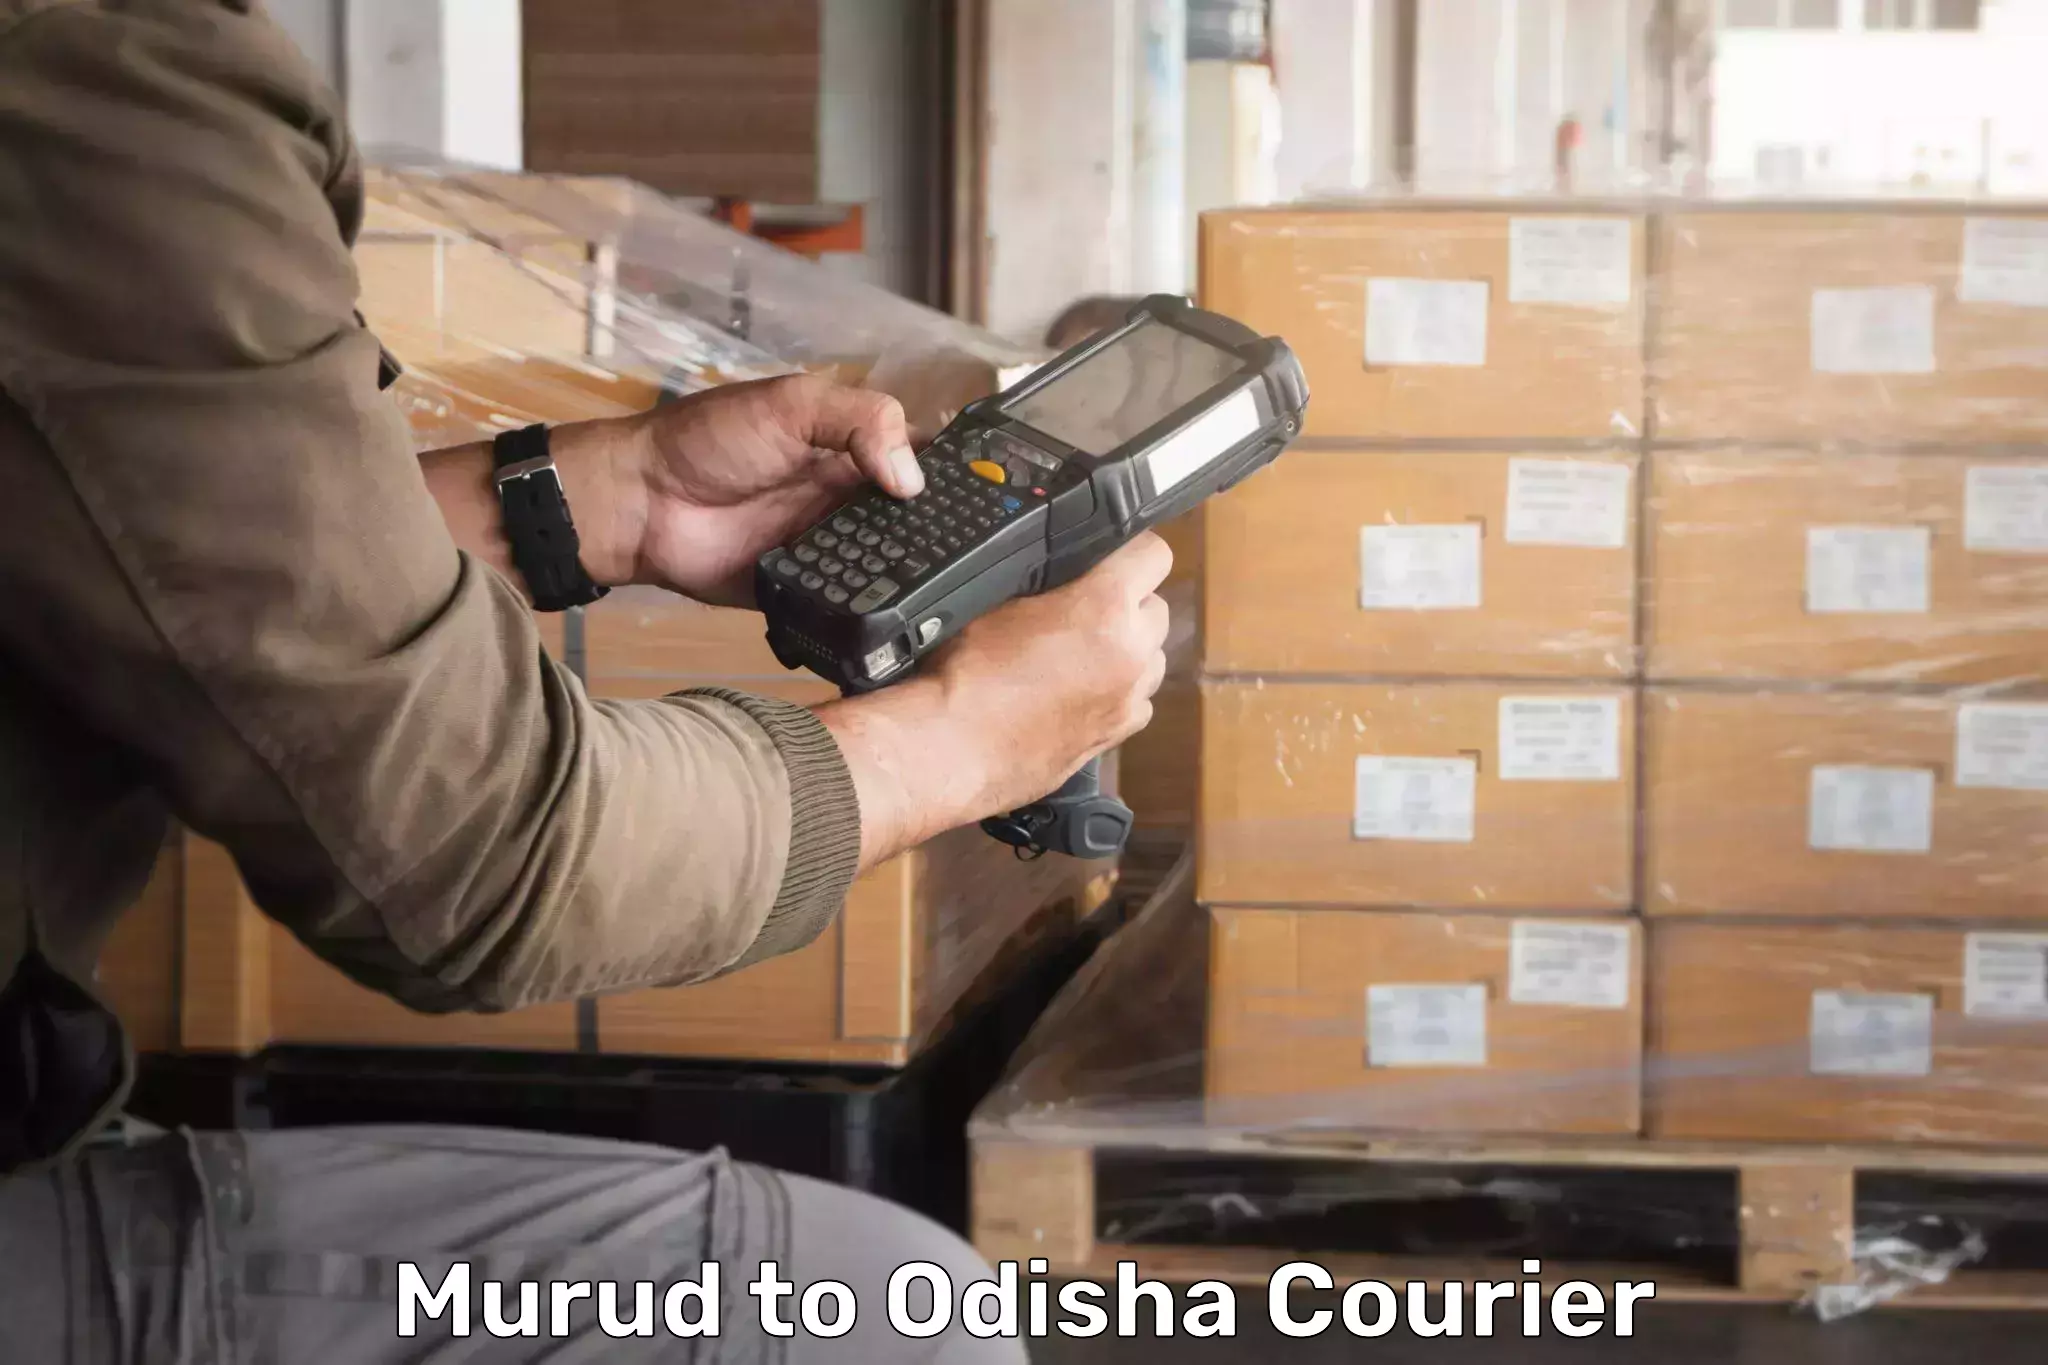 Professional courier services Murud to Dandisahi